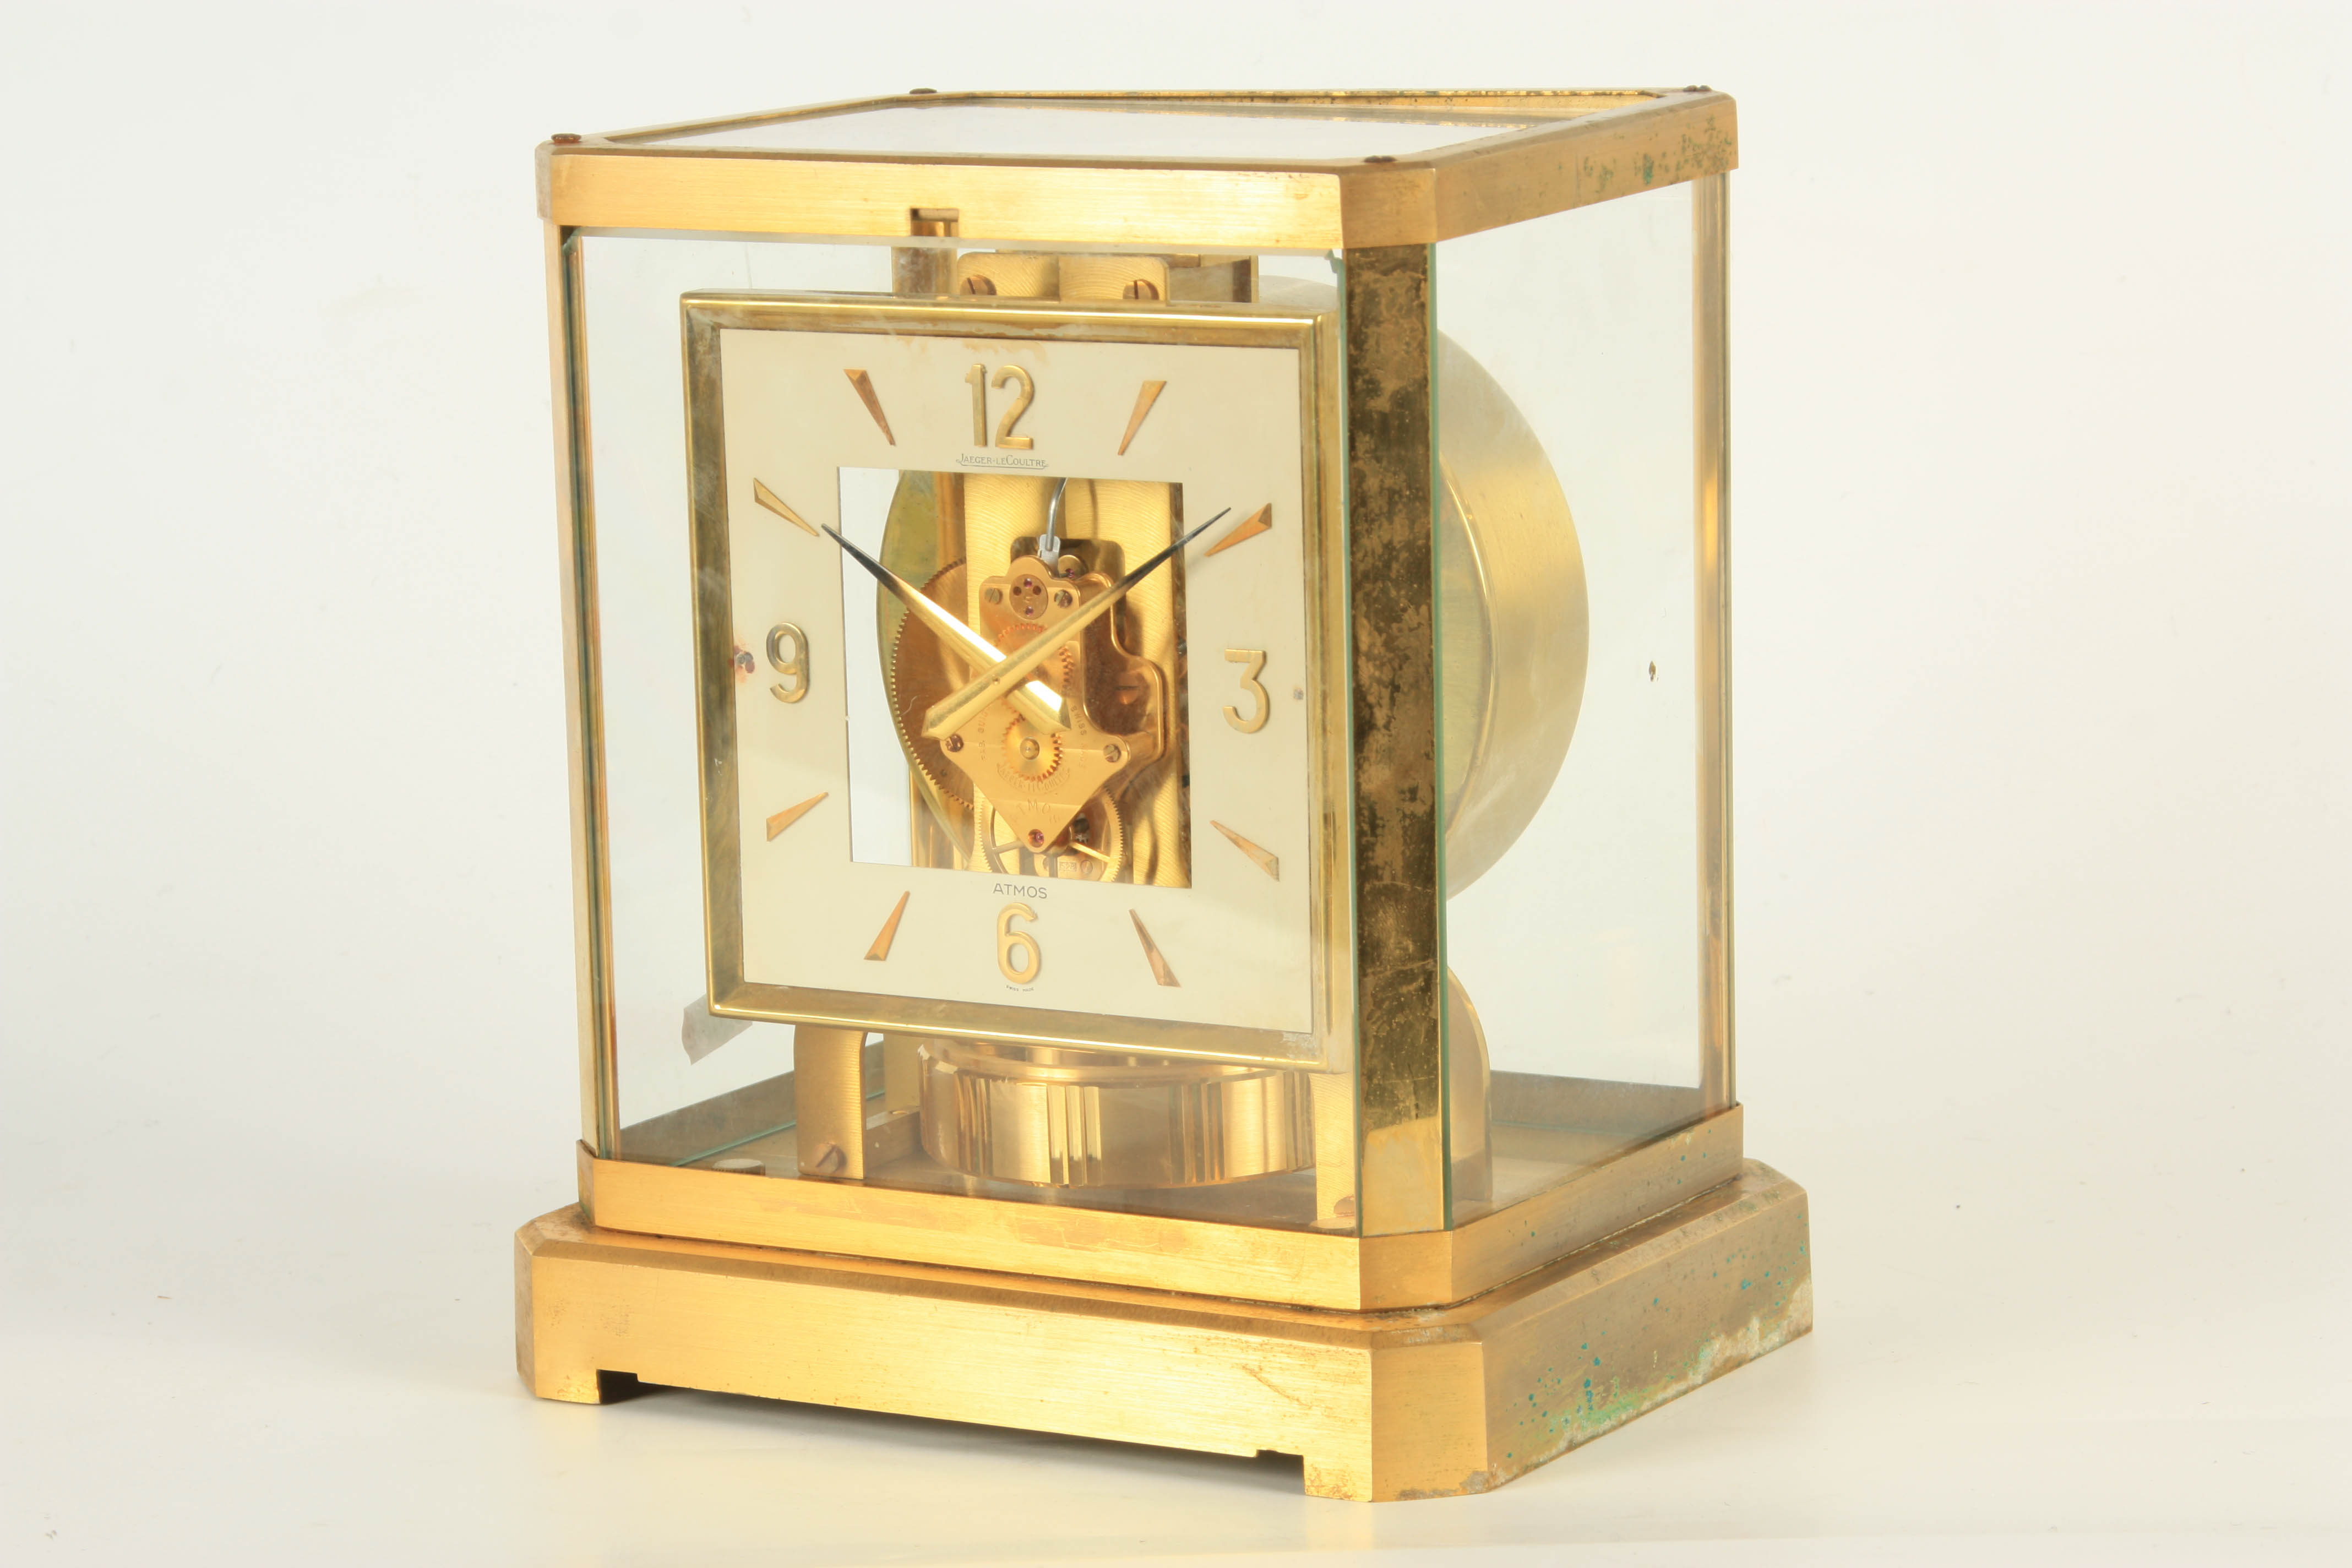 A JAEGER-LECOULTRE ATMOS CLOCK the gilt brass framed case with removable front glass panel enclosing - Image 4 of 8